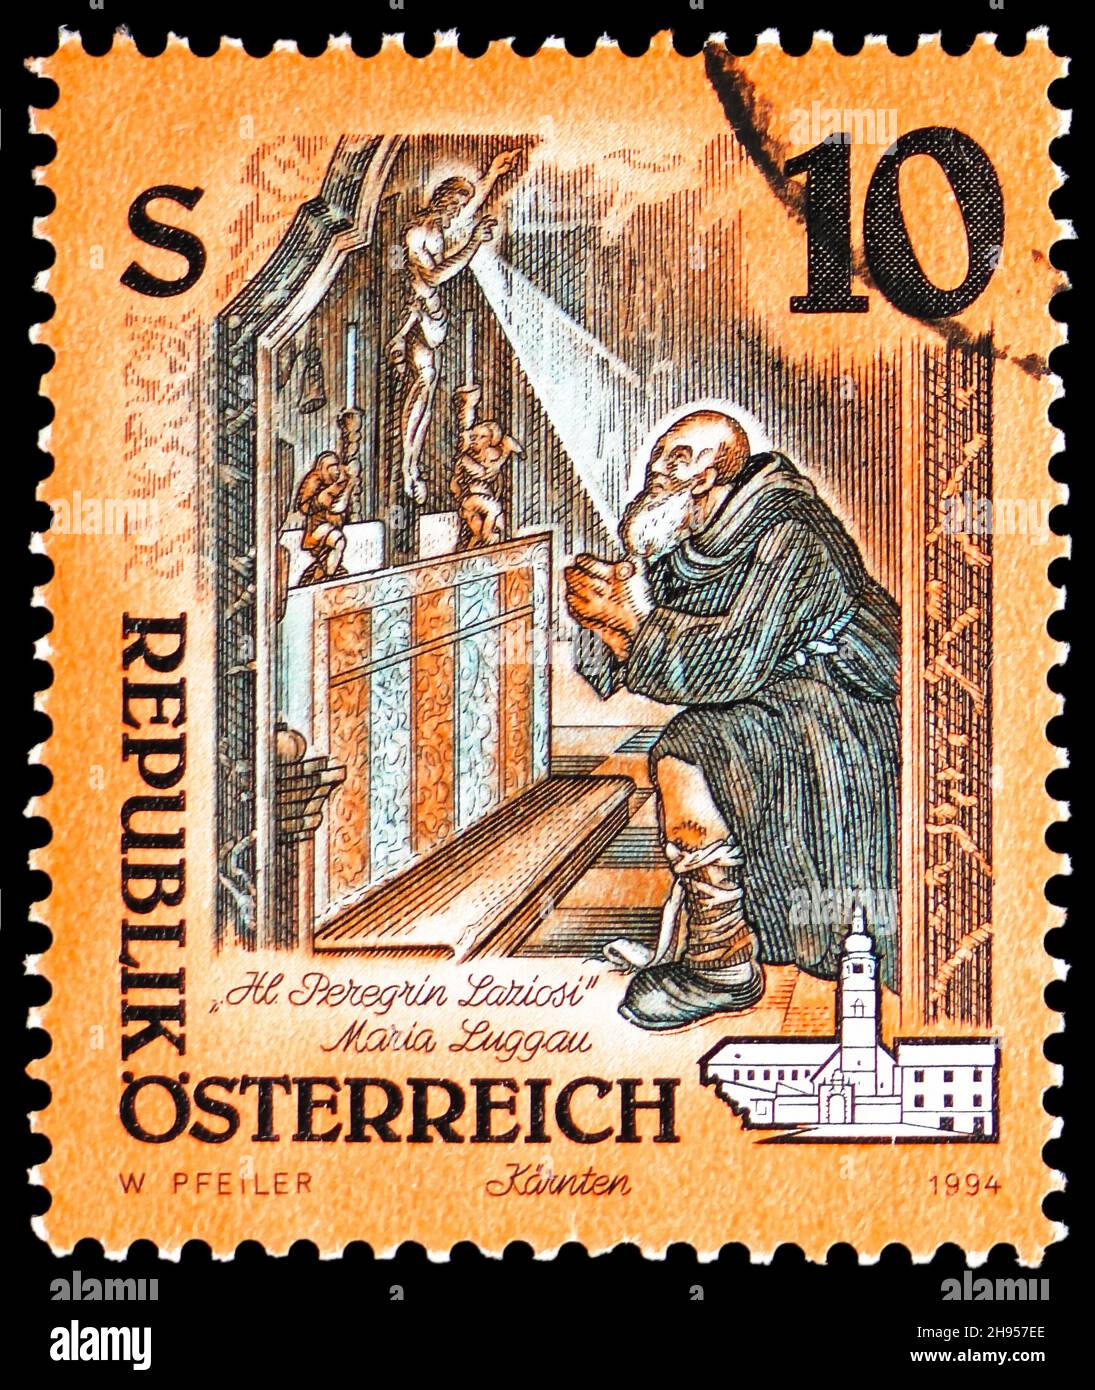 MOSCOW, RUSSIA - OCTOBER 24, 2021: Postage stamp printed in Austria shows 'The Healing of Saint Peregrinus' (altarpiece), Art from Monasteries serie, Stock Photo